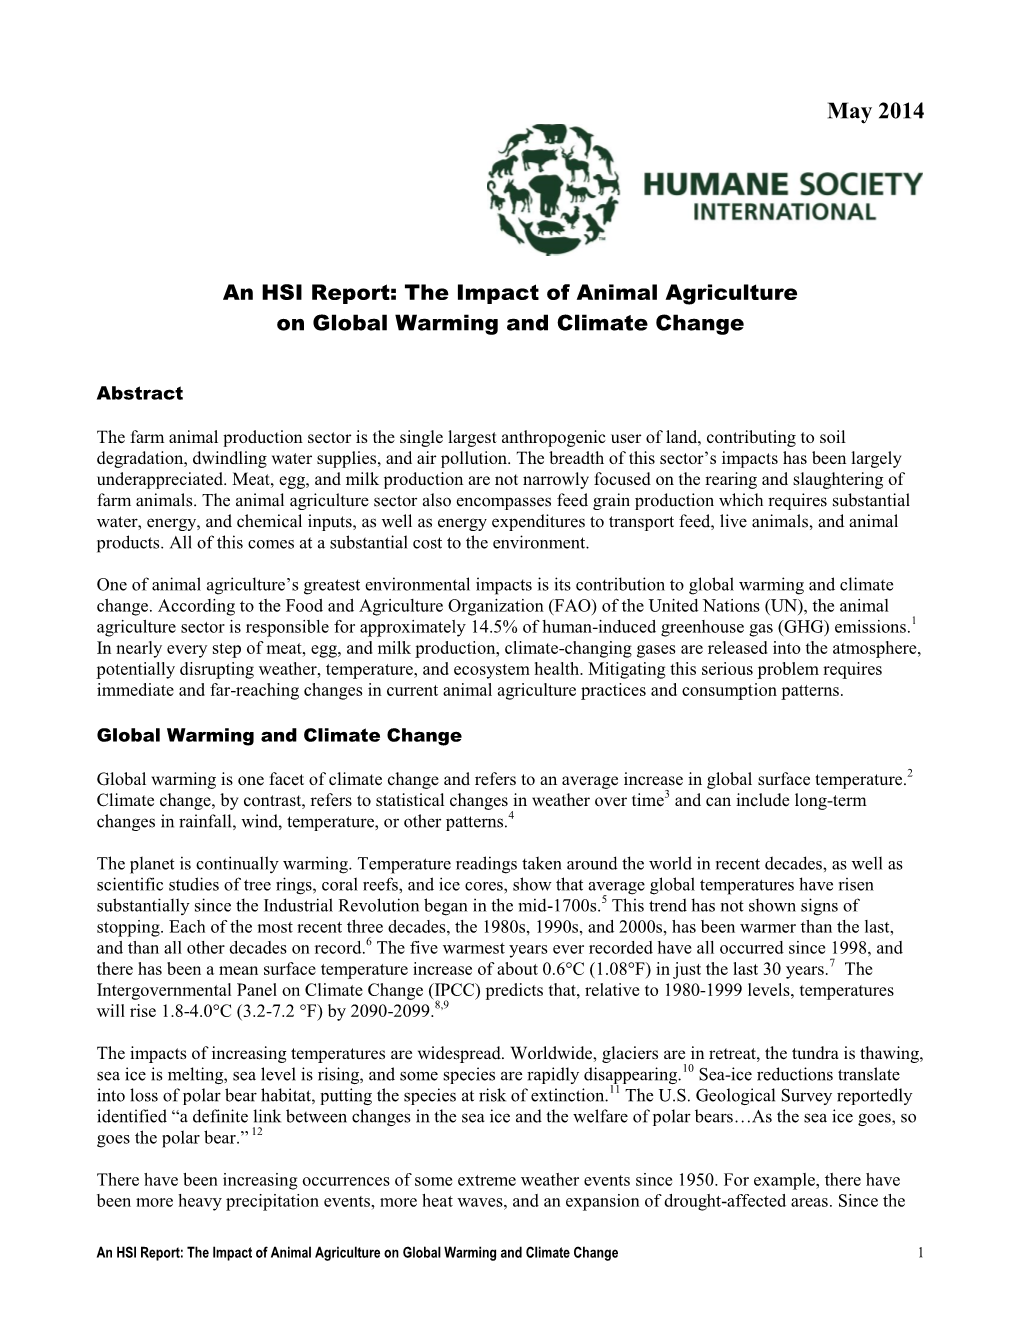 The Impact of Animal Agriculture on Global Warming and Climate Change